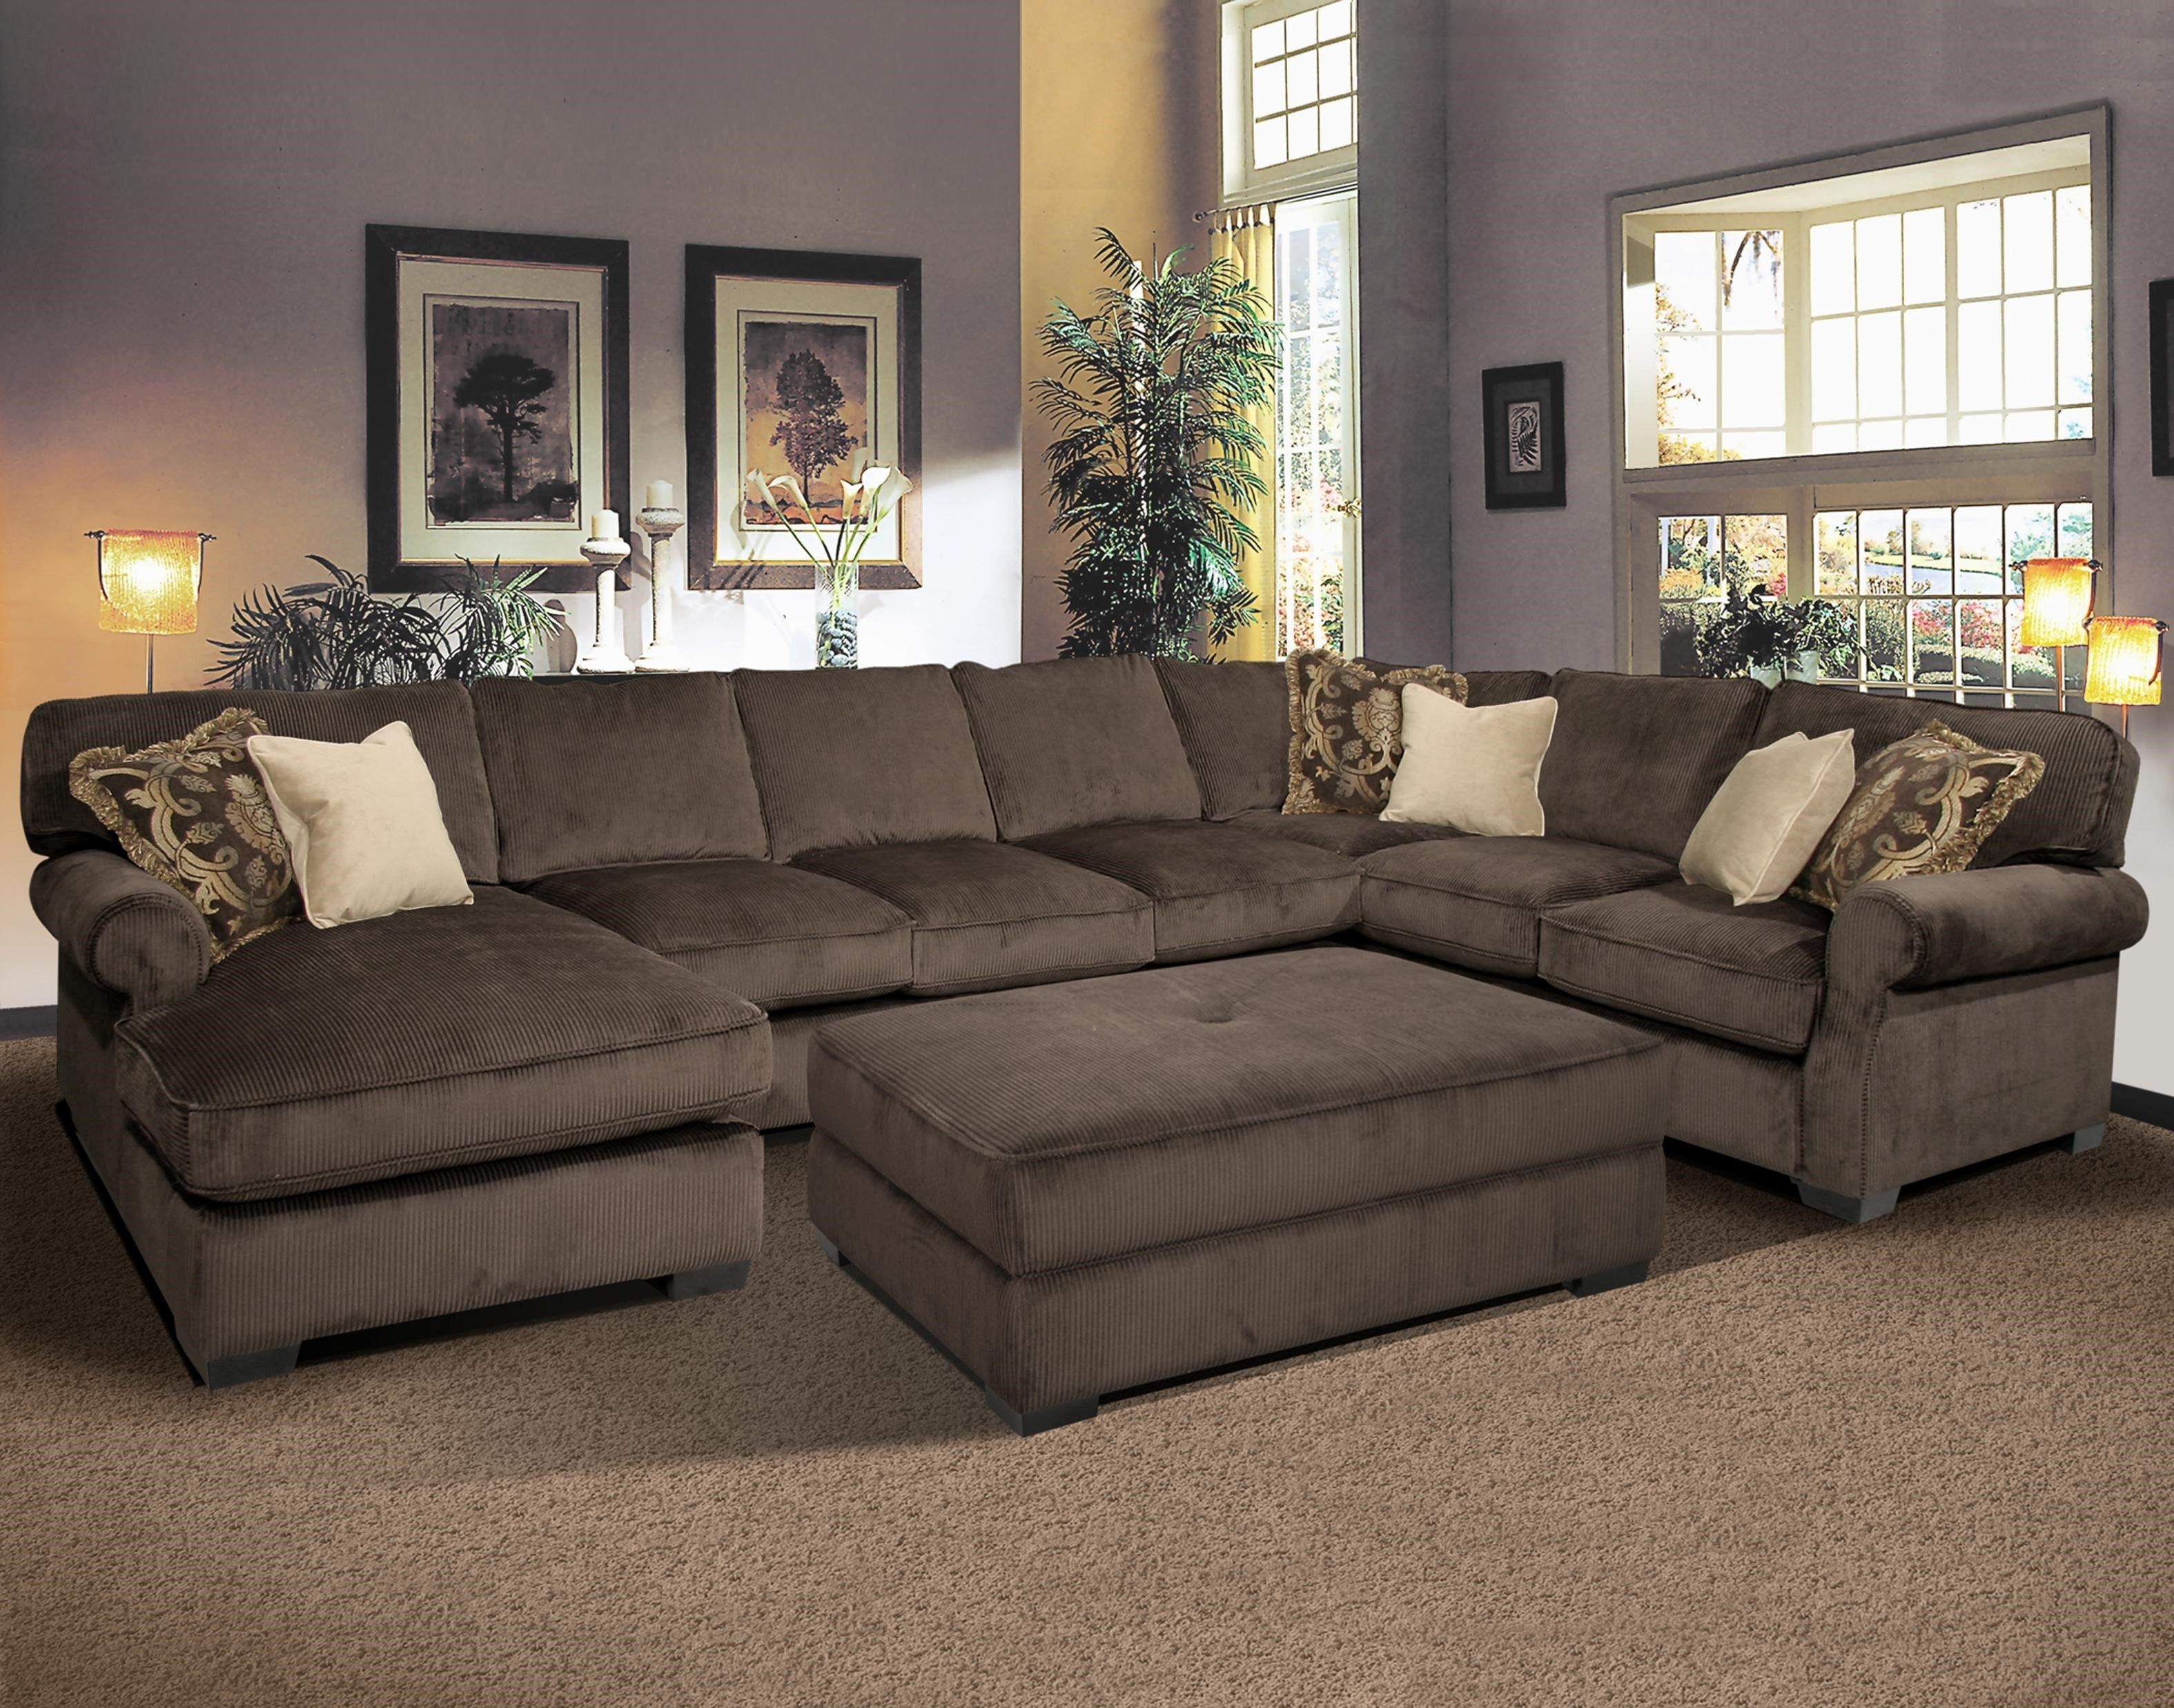 Sectional Sofa For Sale Edmonton | Home Decoration Ideas With Regard To Sectional Sofas At Edmonton (View 10 of 10)